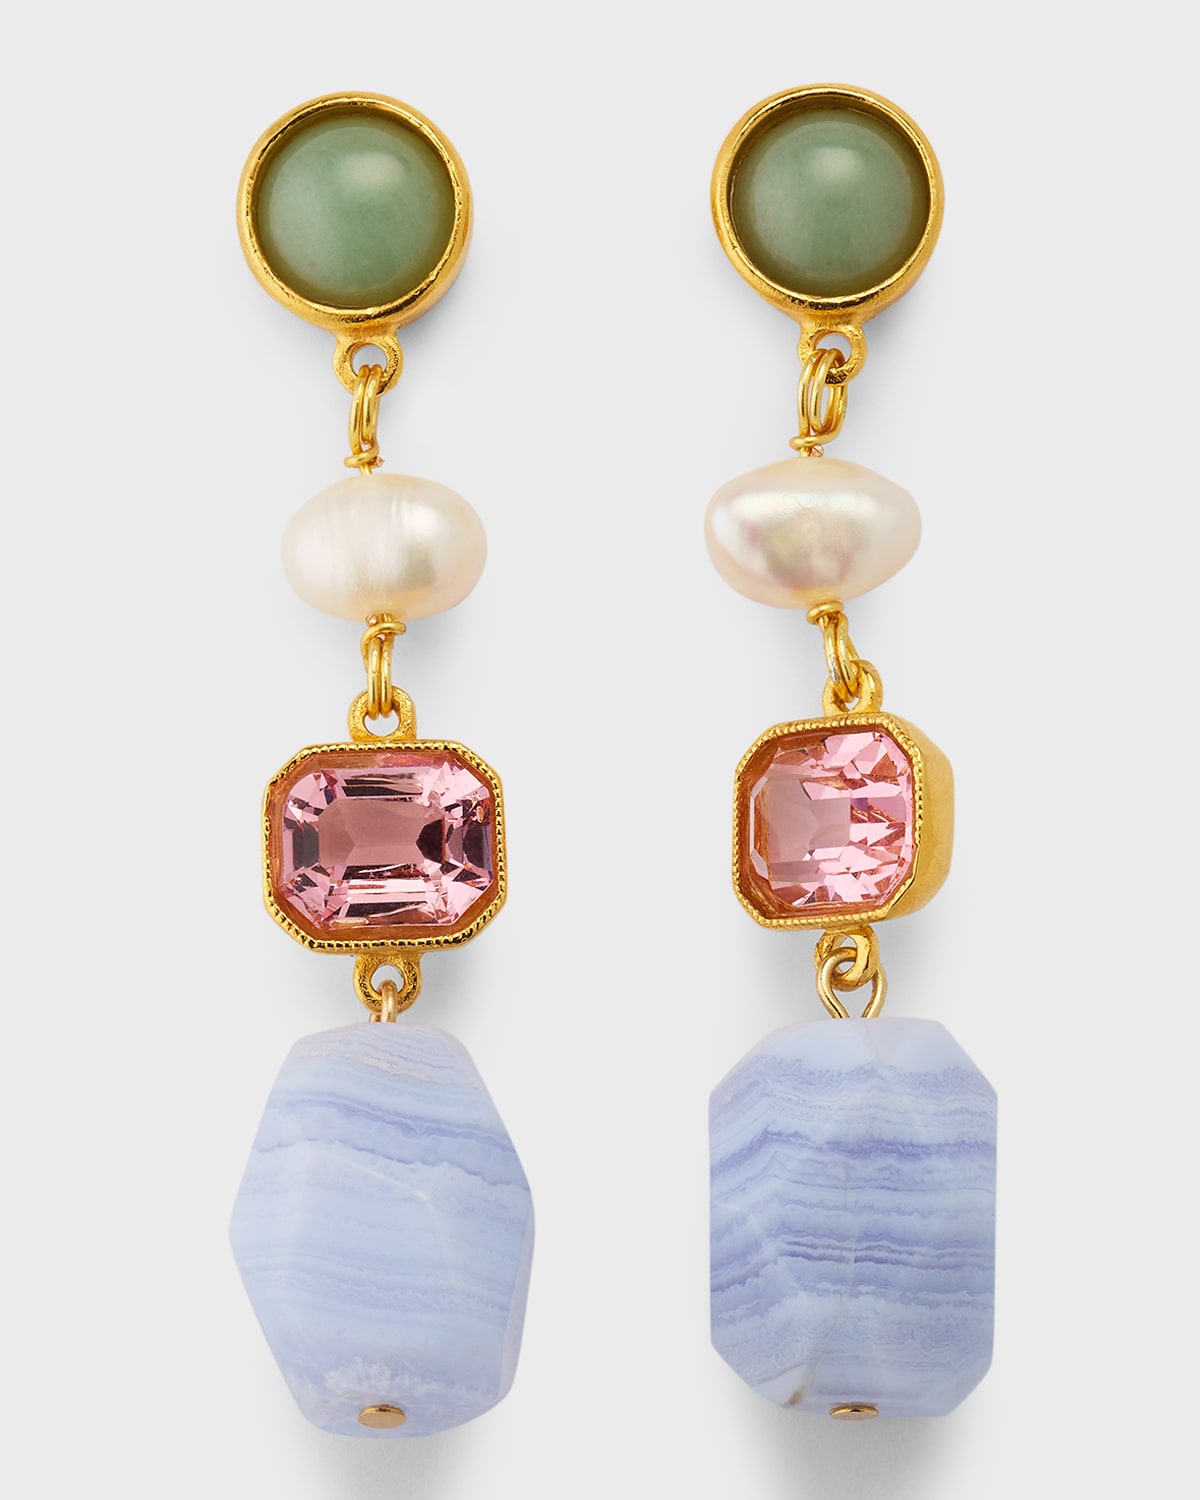 Ben-amun 24k Electroplated Gold Mixed-stone Drop Earrings In Blue Agate